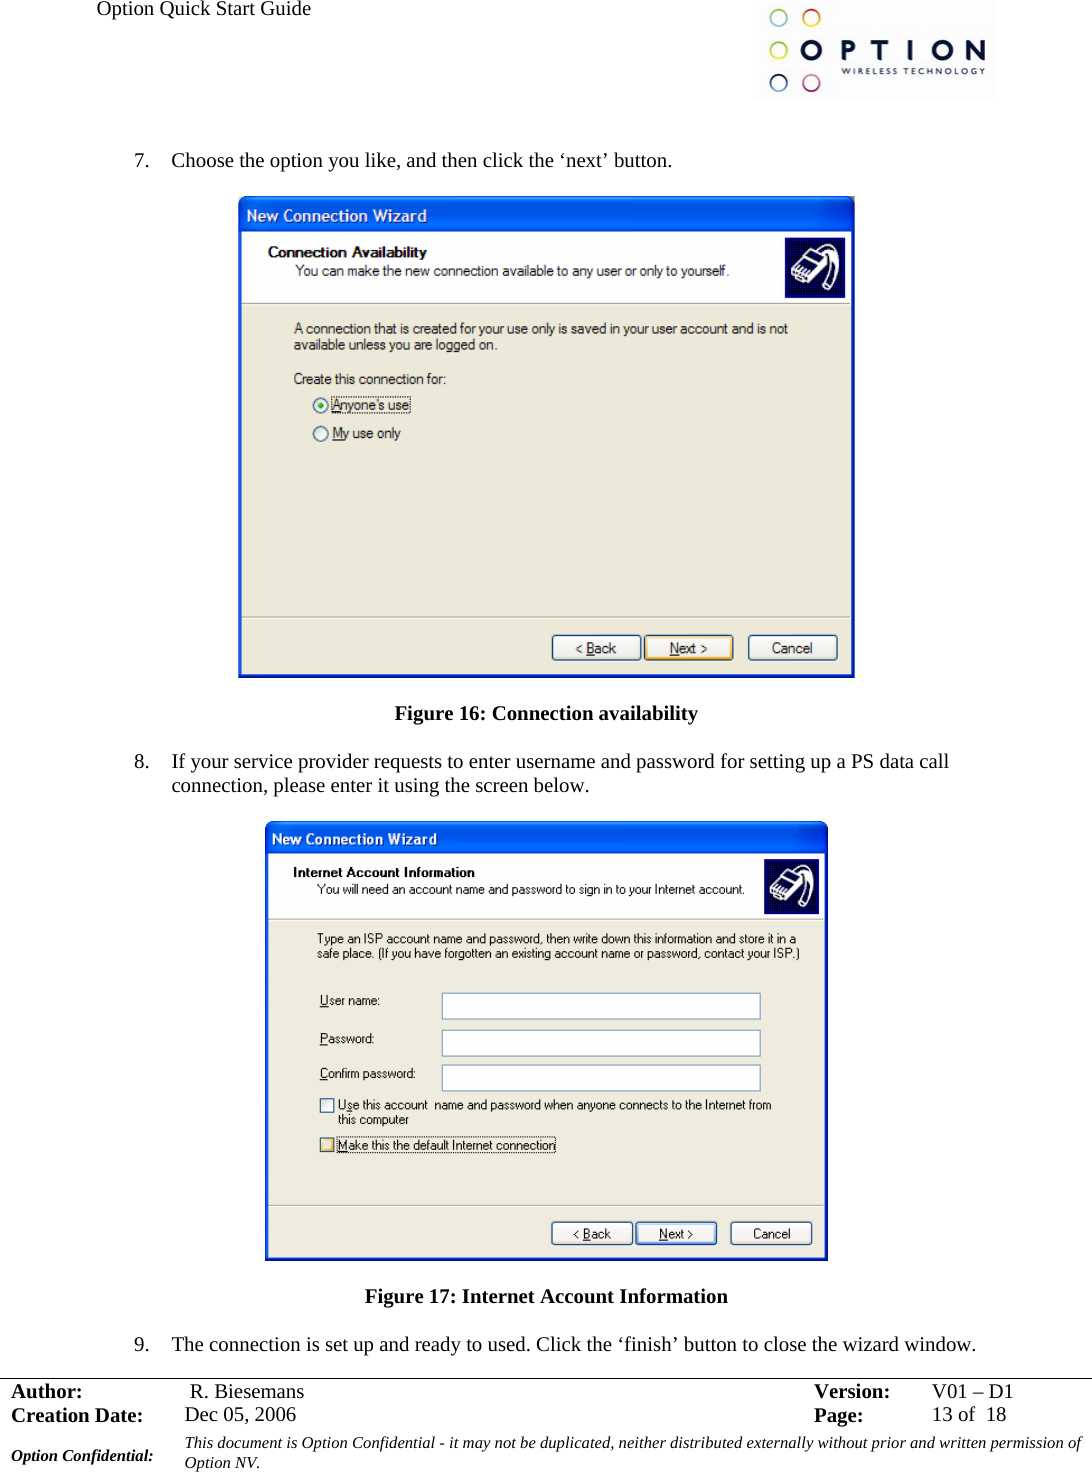 Option Quick Start Guide     Author:   R. Biesemans  Version:  V01 –D1Creation Date:  Dec 05, 2006    Page:  13 of  18 Option Confidential:  This document is Option Confidential - it may not be duplicated, neither distributed externally without prior and written permission of Option NV.    7. Choose the option you like, and then click the ‘next’ button.    Figure 16: Connection availability  8. If your service provider requests to enter username and password for setting up a PS data call connection, please enter it using the screen below.    Figure 17: Internet Account Information  9. The connection is set up and ready to used. Click the ‘finish’ button to close the wizard window. 